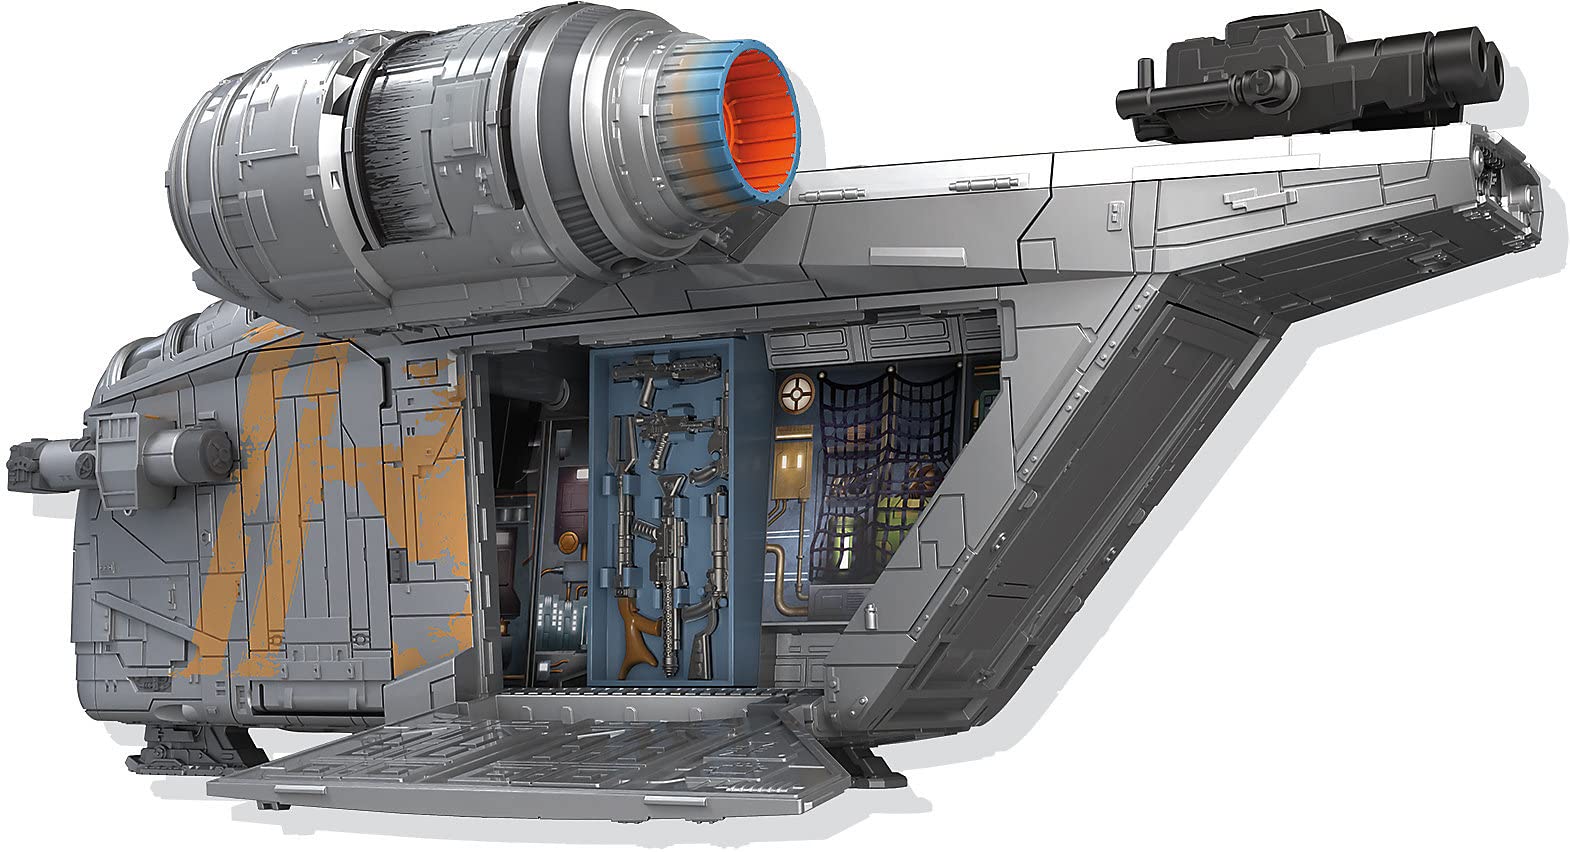 STAR WARS Hasbro Mission Fleet The Mandalorian The Child Razor Crest Outer Rim Run Deluxe Vehicle with 2.5-Inch-Scale Figure,for Kids Ages 4 and Up